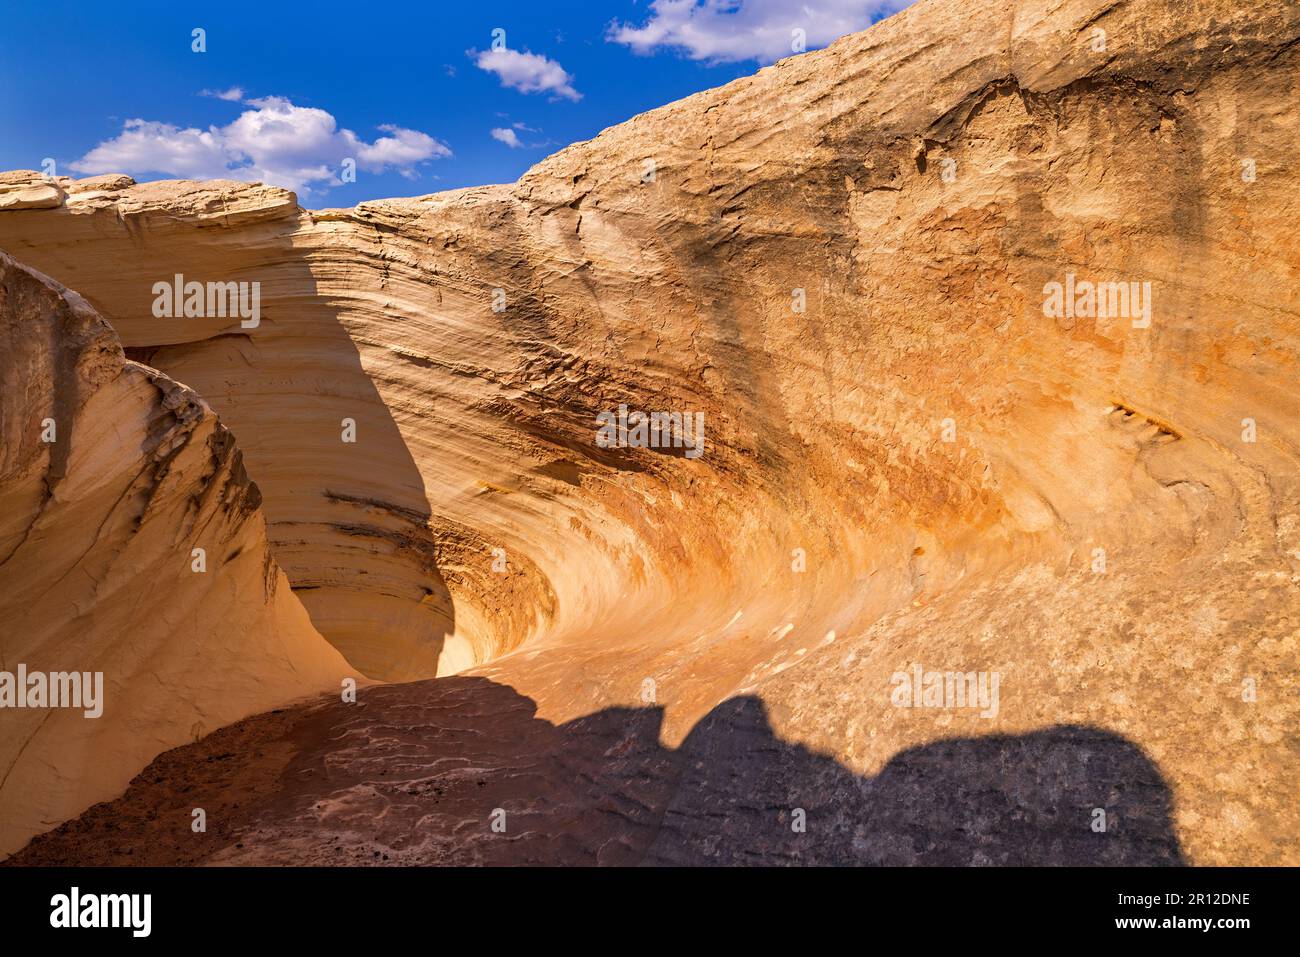 Looking down into the large funnel-like shape of The Nautilus that goes out the bottom on the other side, Grand Staircase-Escalante NM, Utah, USA. Stock Photo